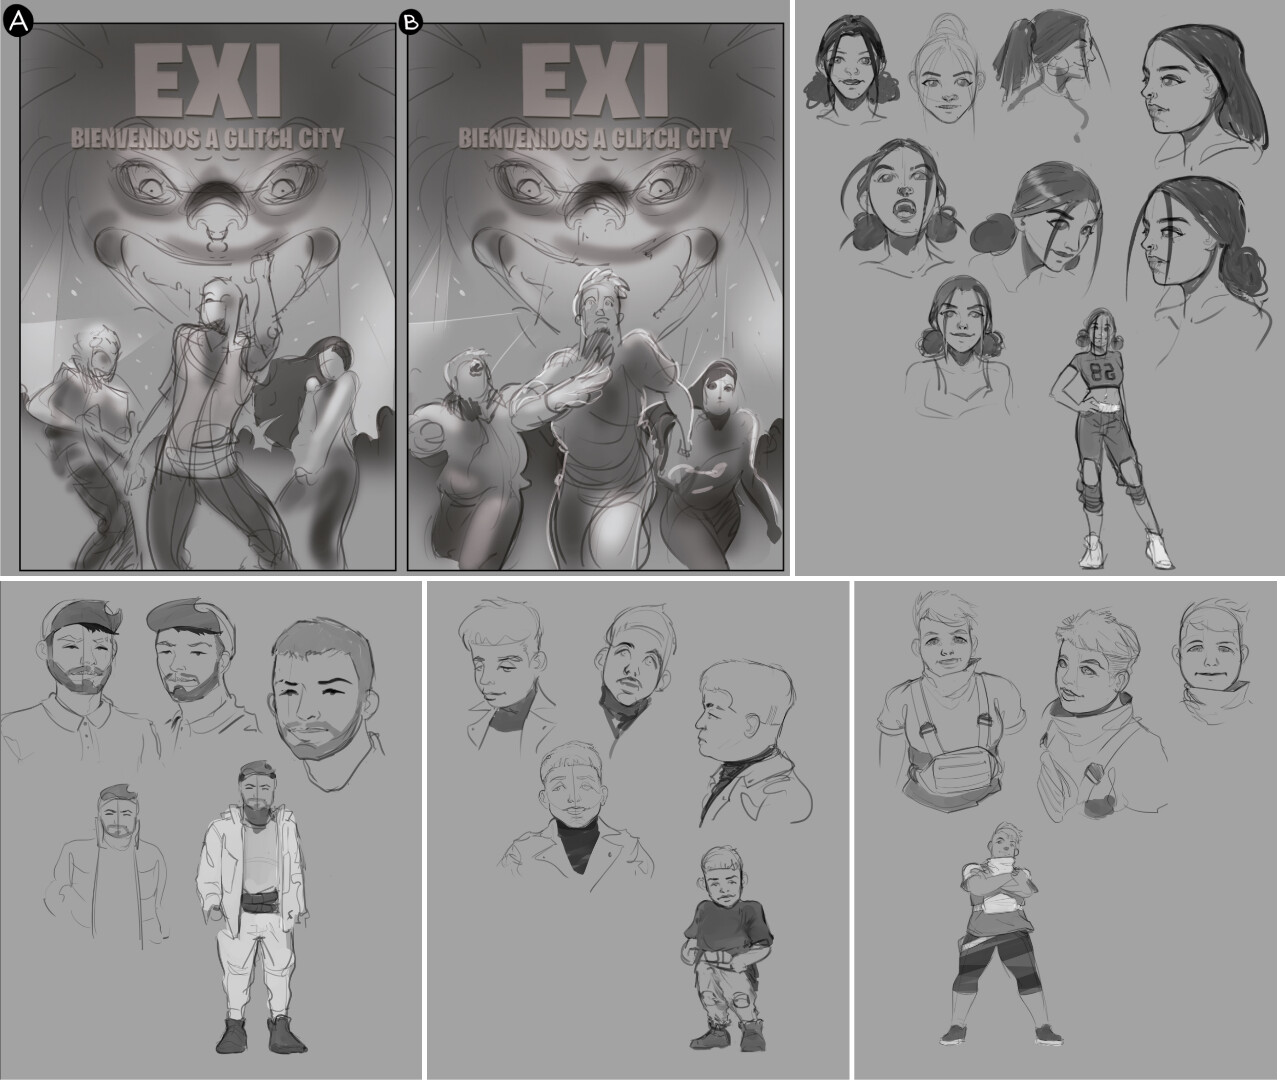 Sketches for the cover and characters.